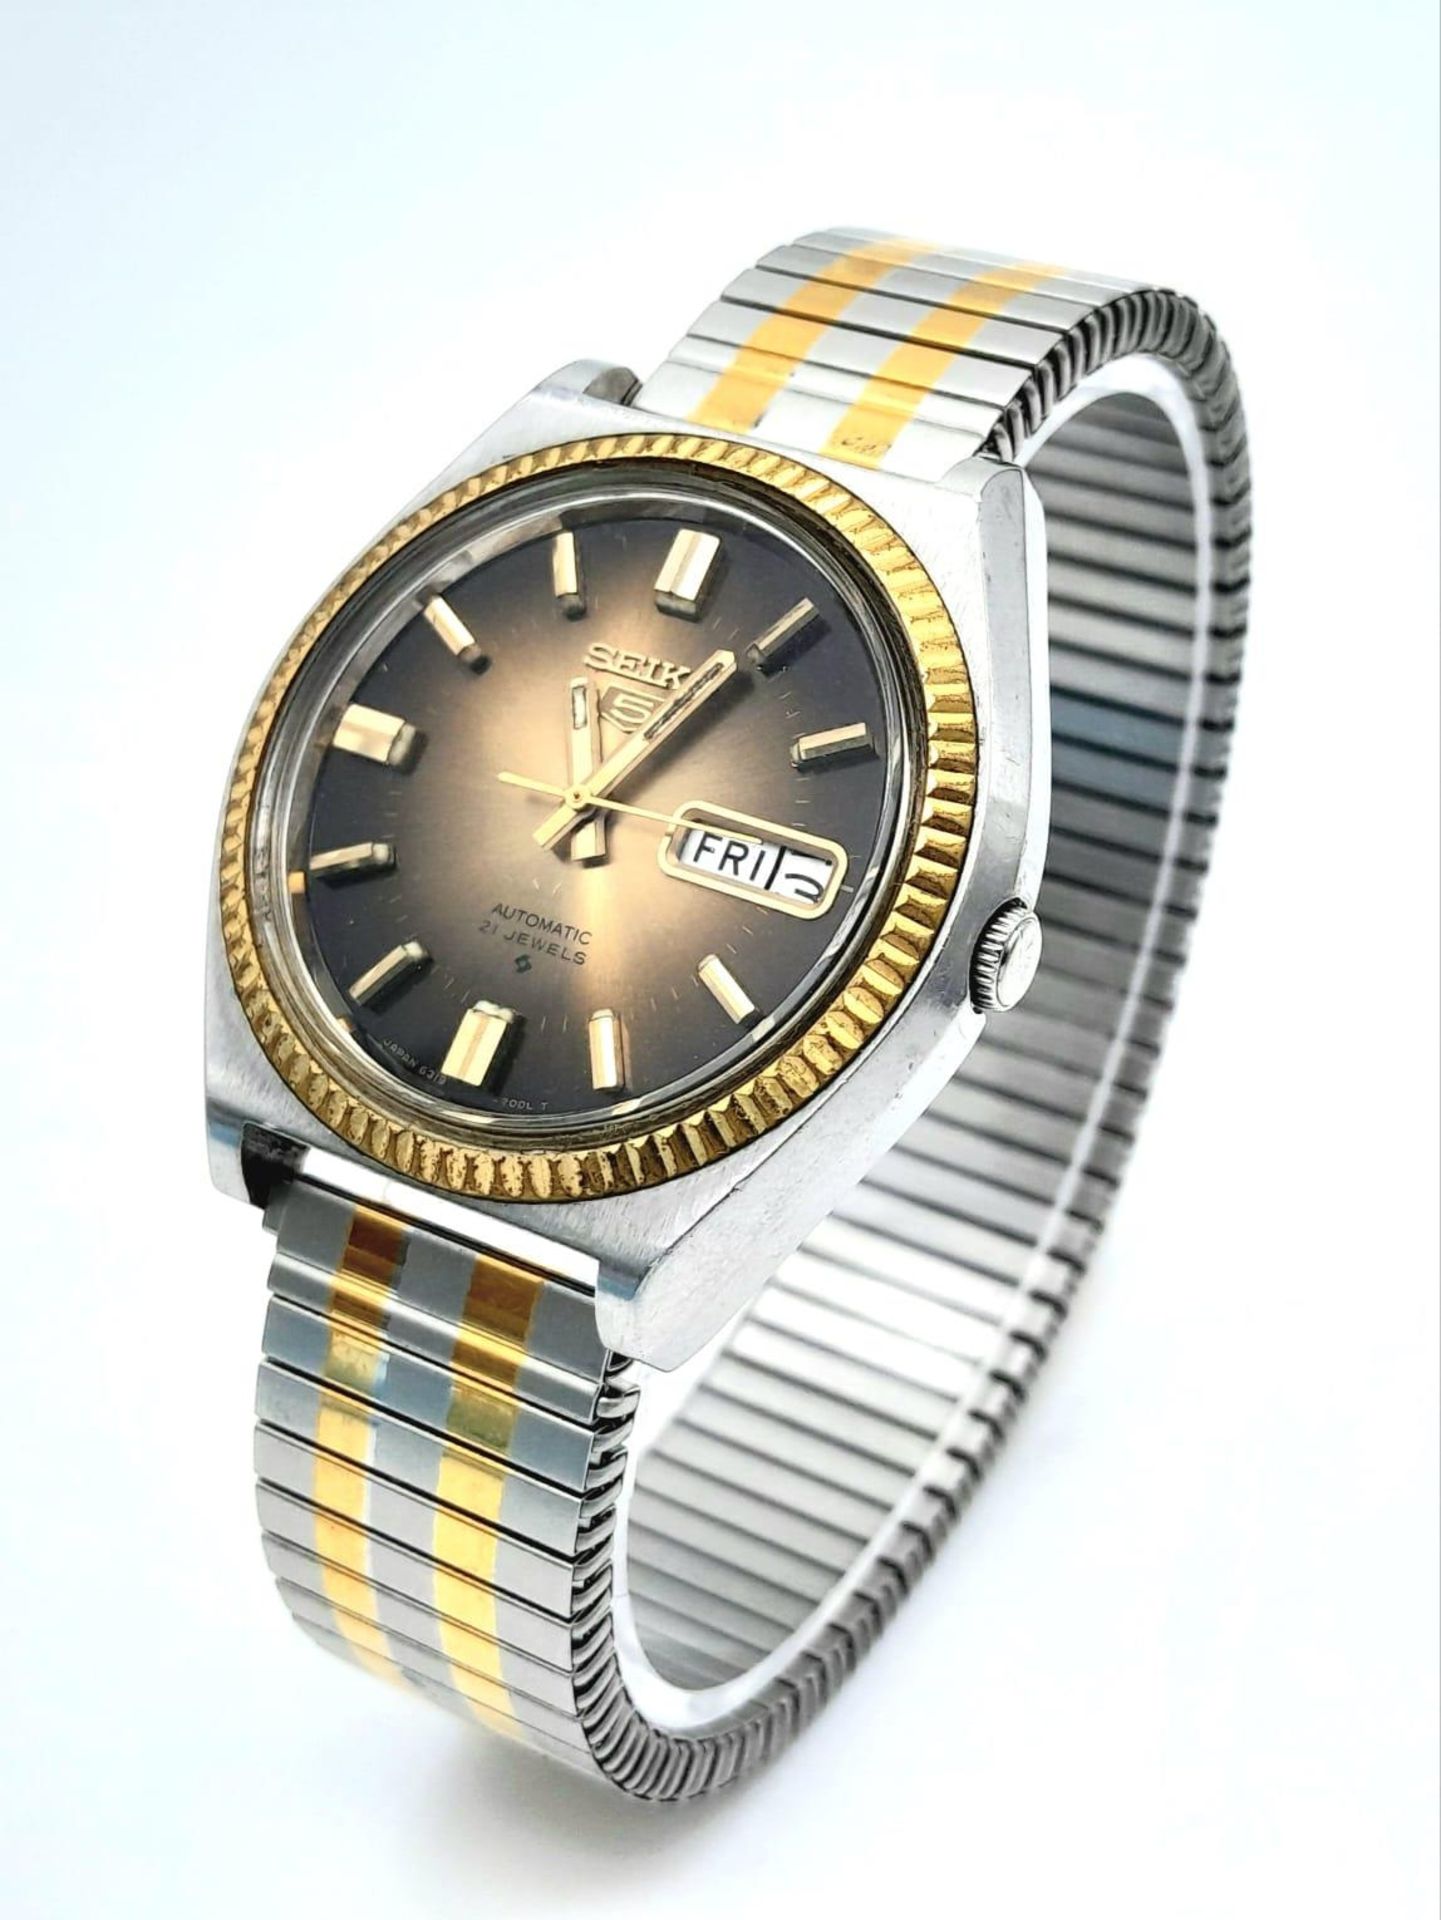 A Vintage Seiko 5 Automatic Gents Watch. Two tone stainless steel bracelet and case - 37mm. Metallic